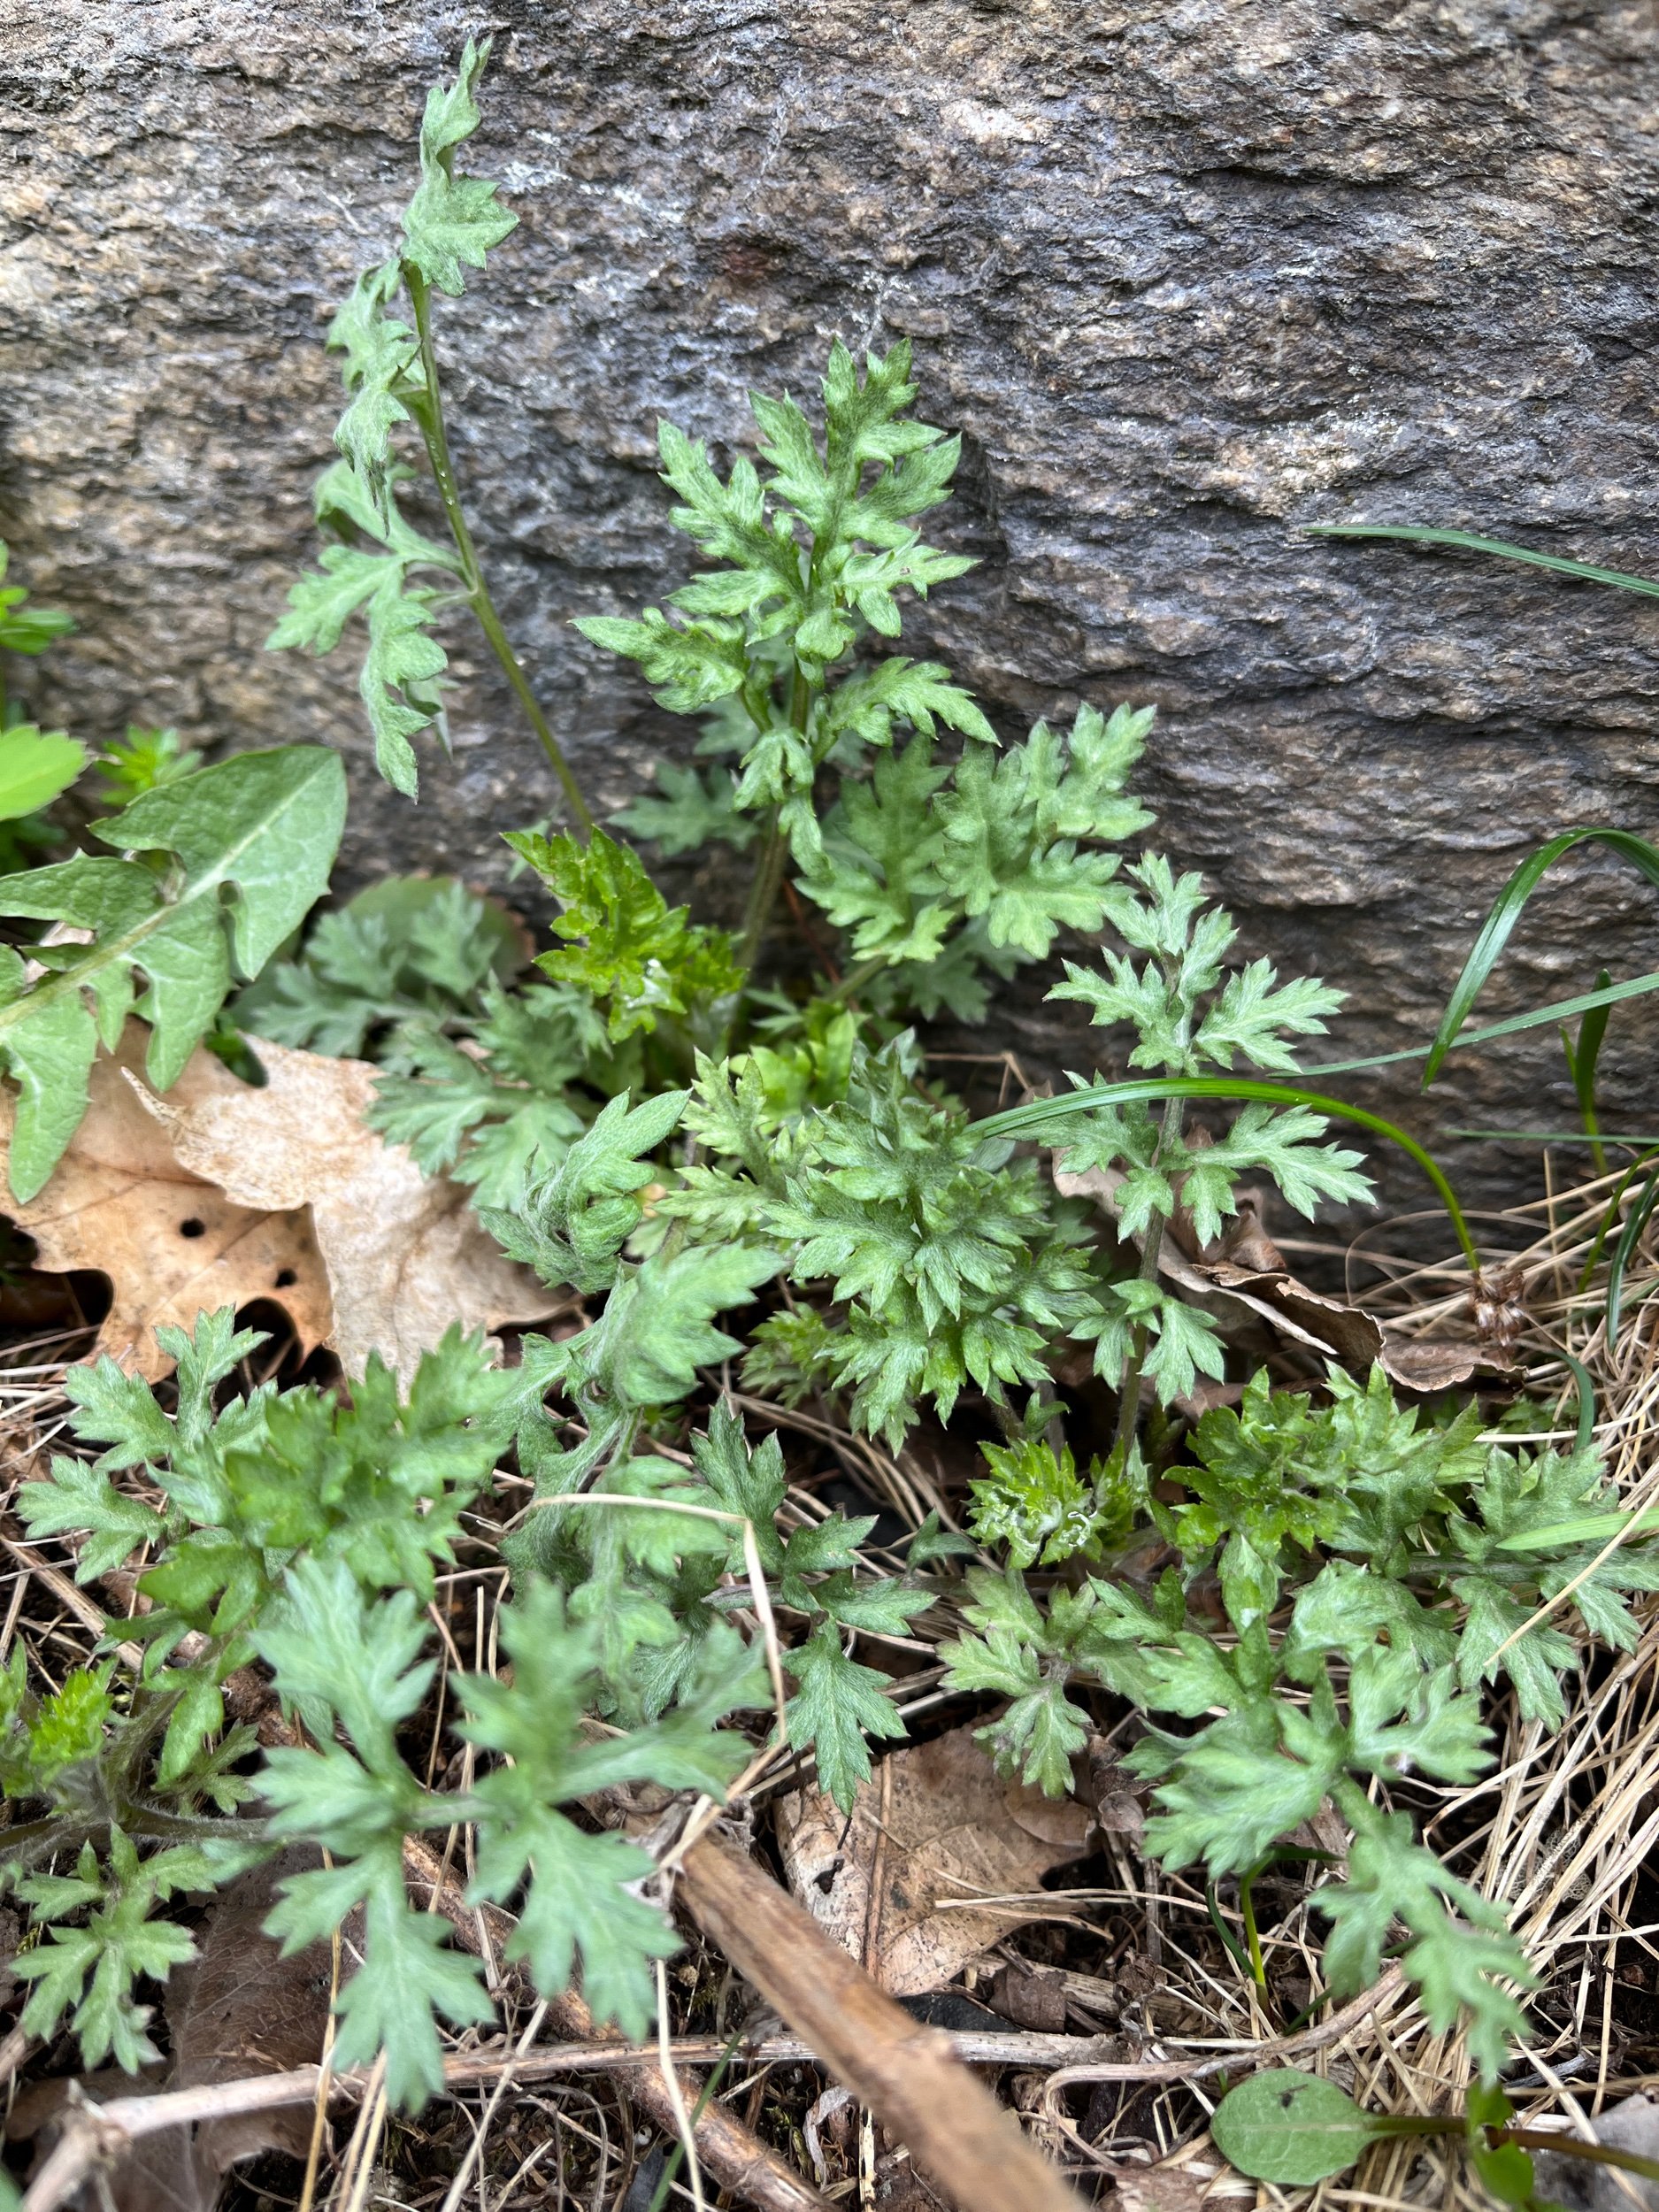  Mugwort! We have new mugwort products this year, and I am thrilled that the plants are already returning. 